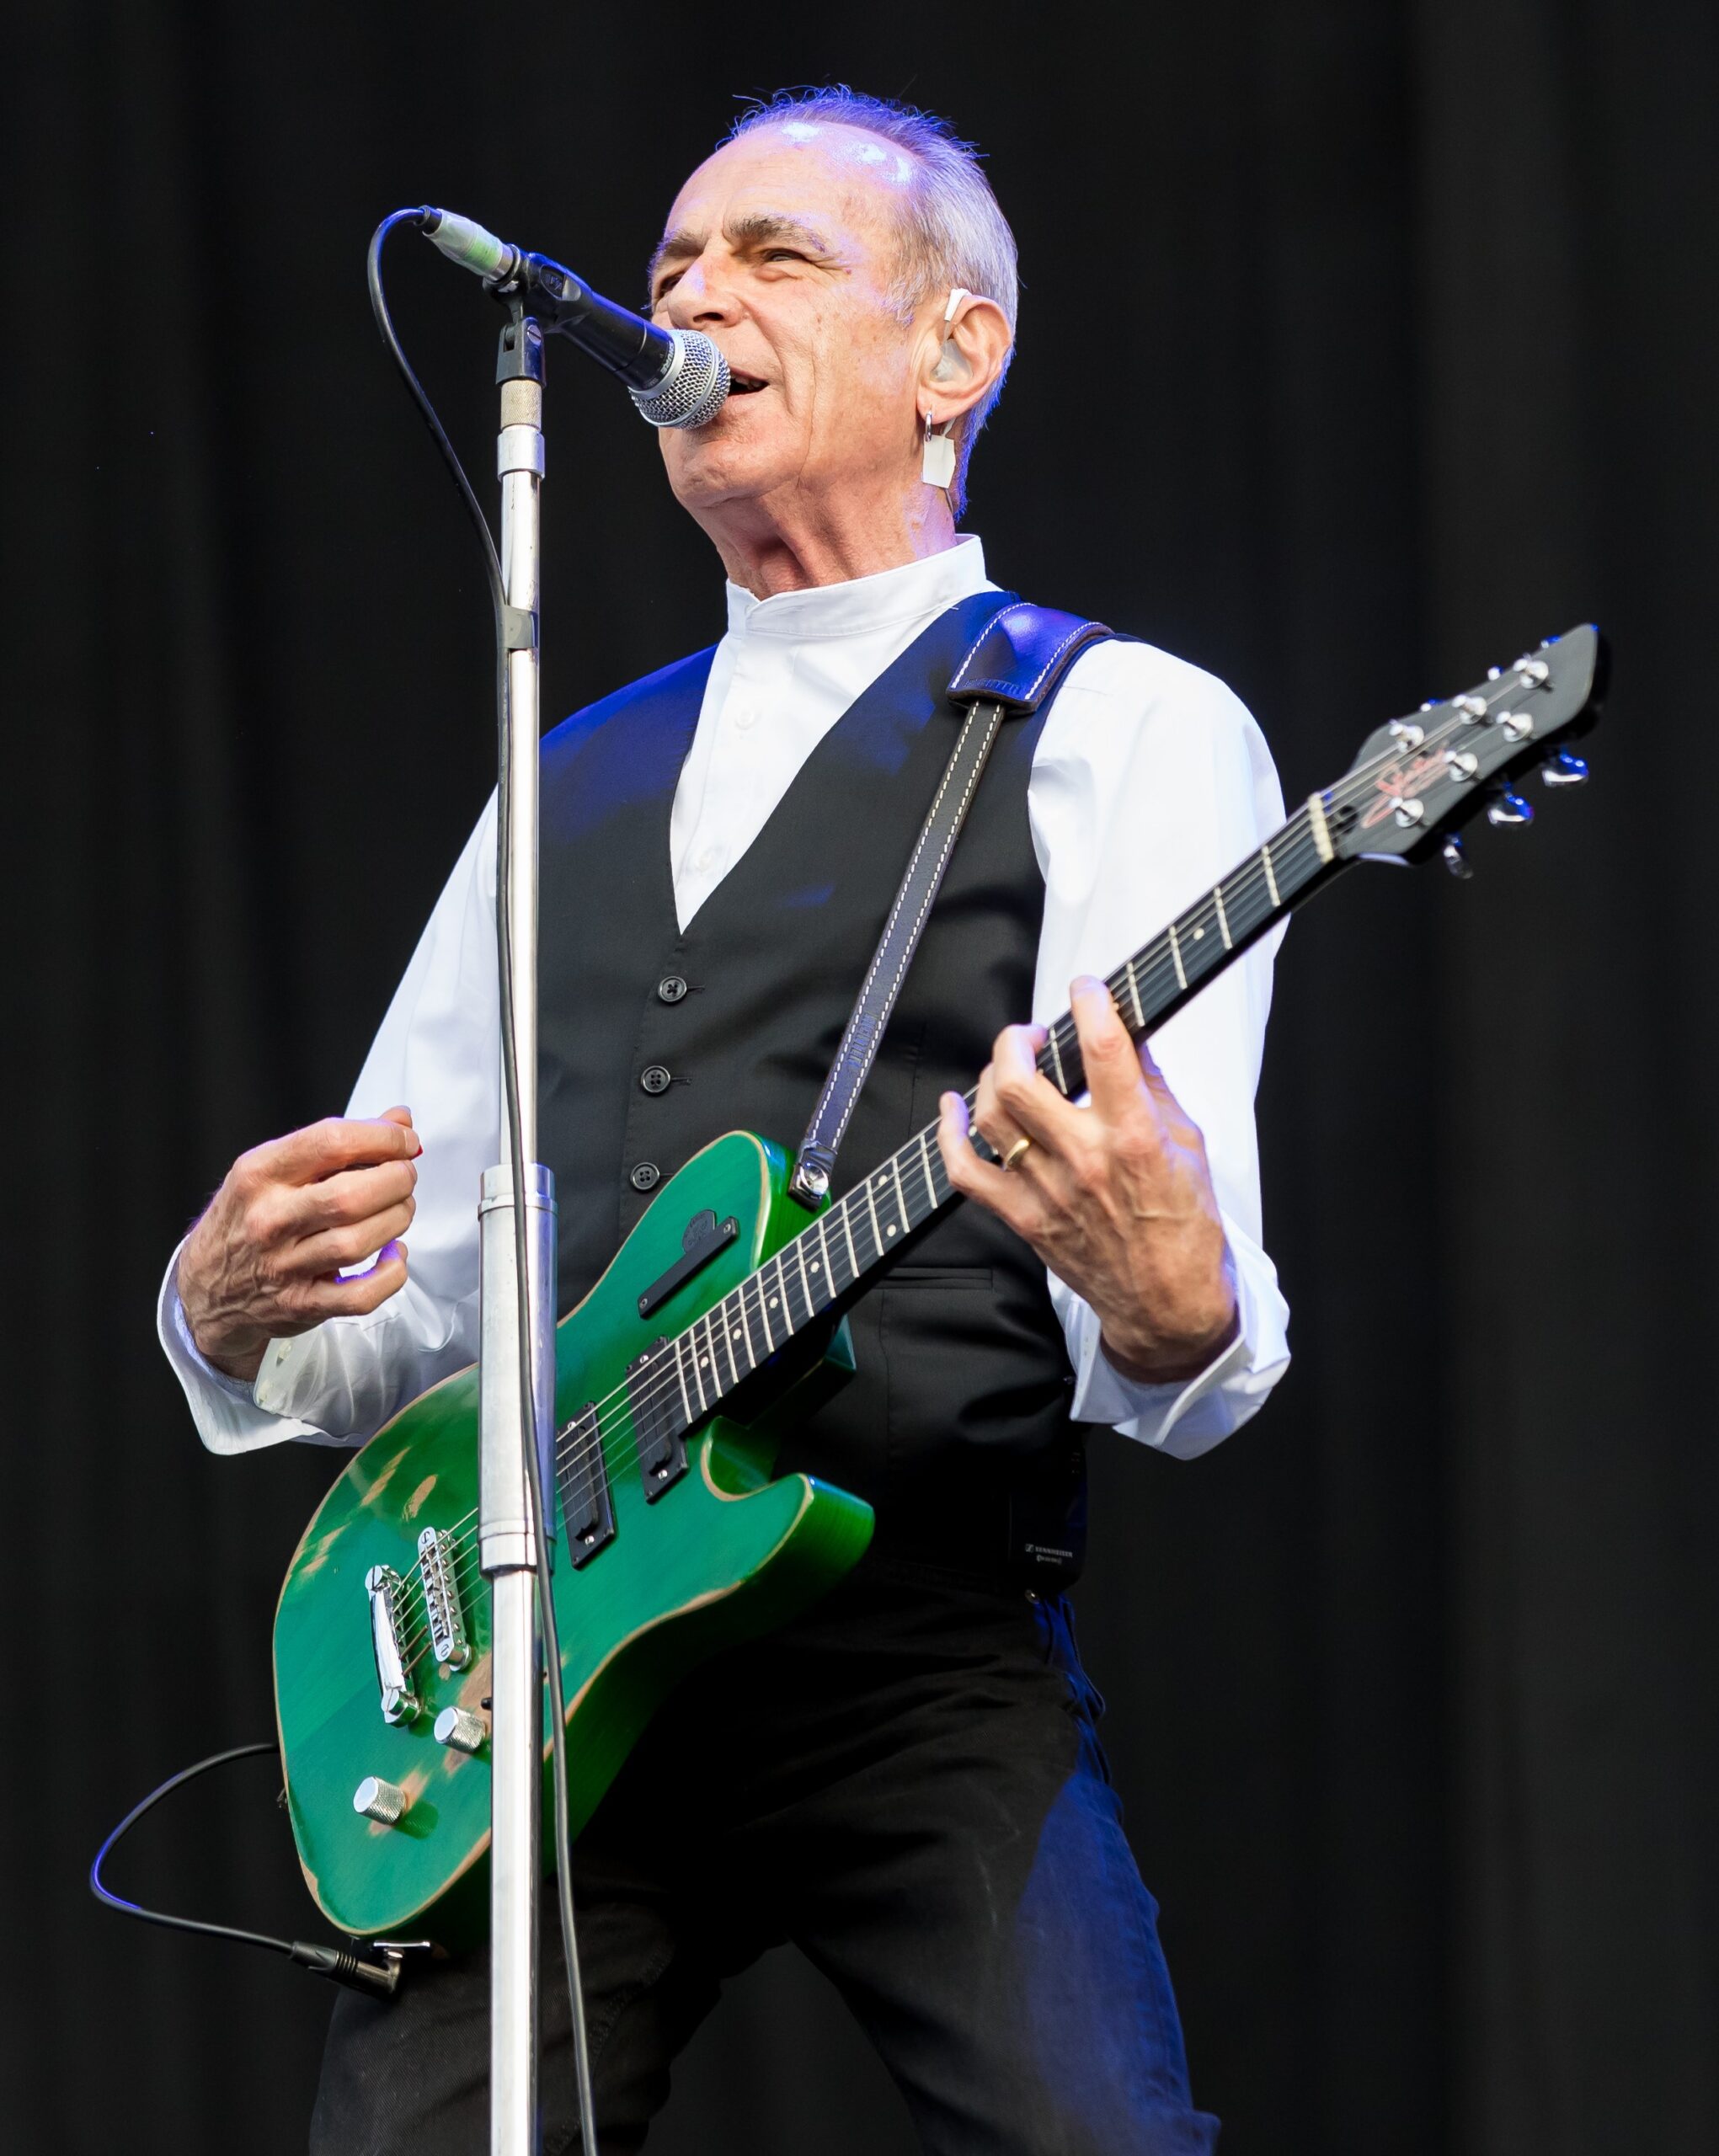 An image depicting Francis Rossi with a green guitar